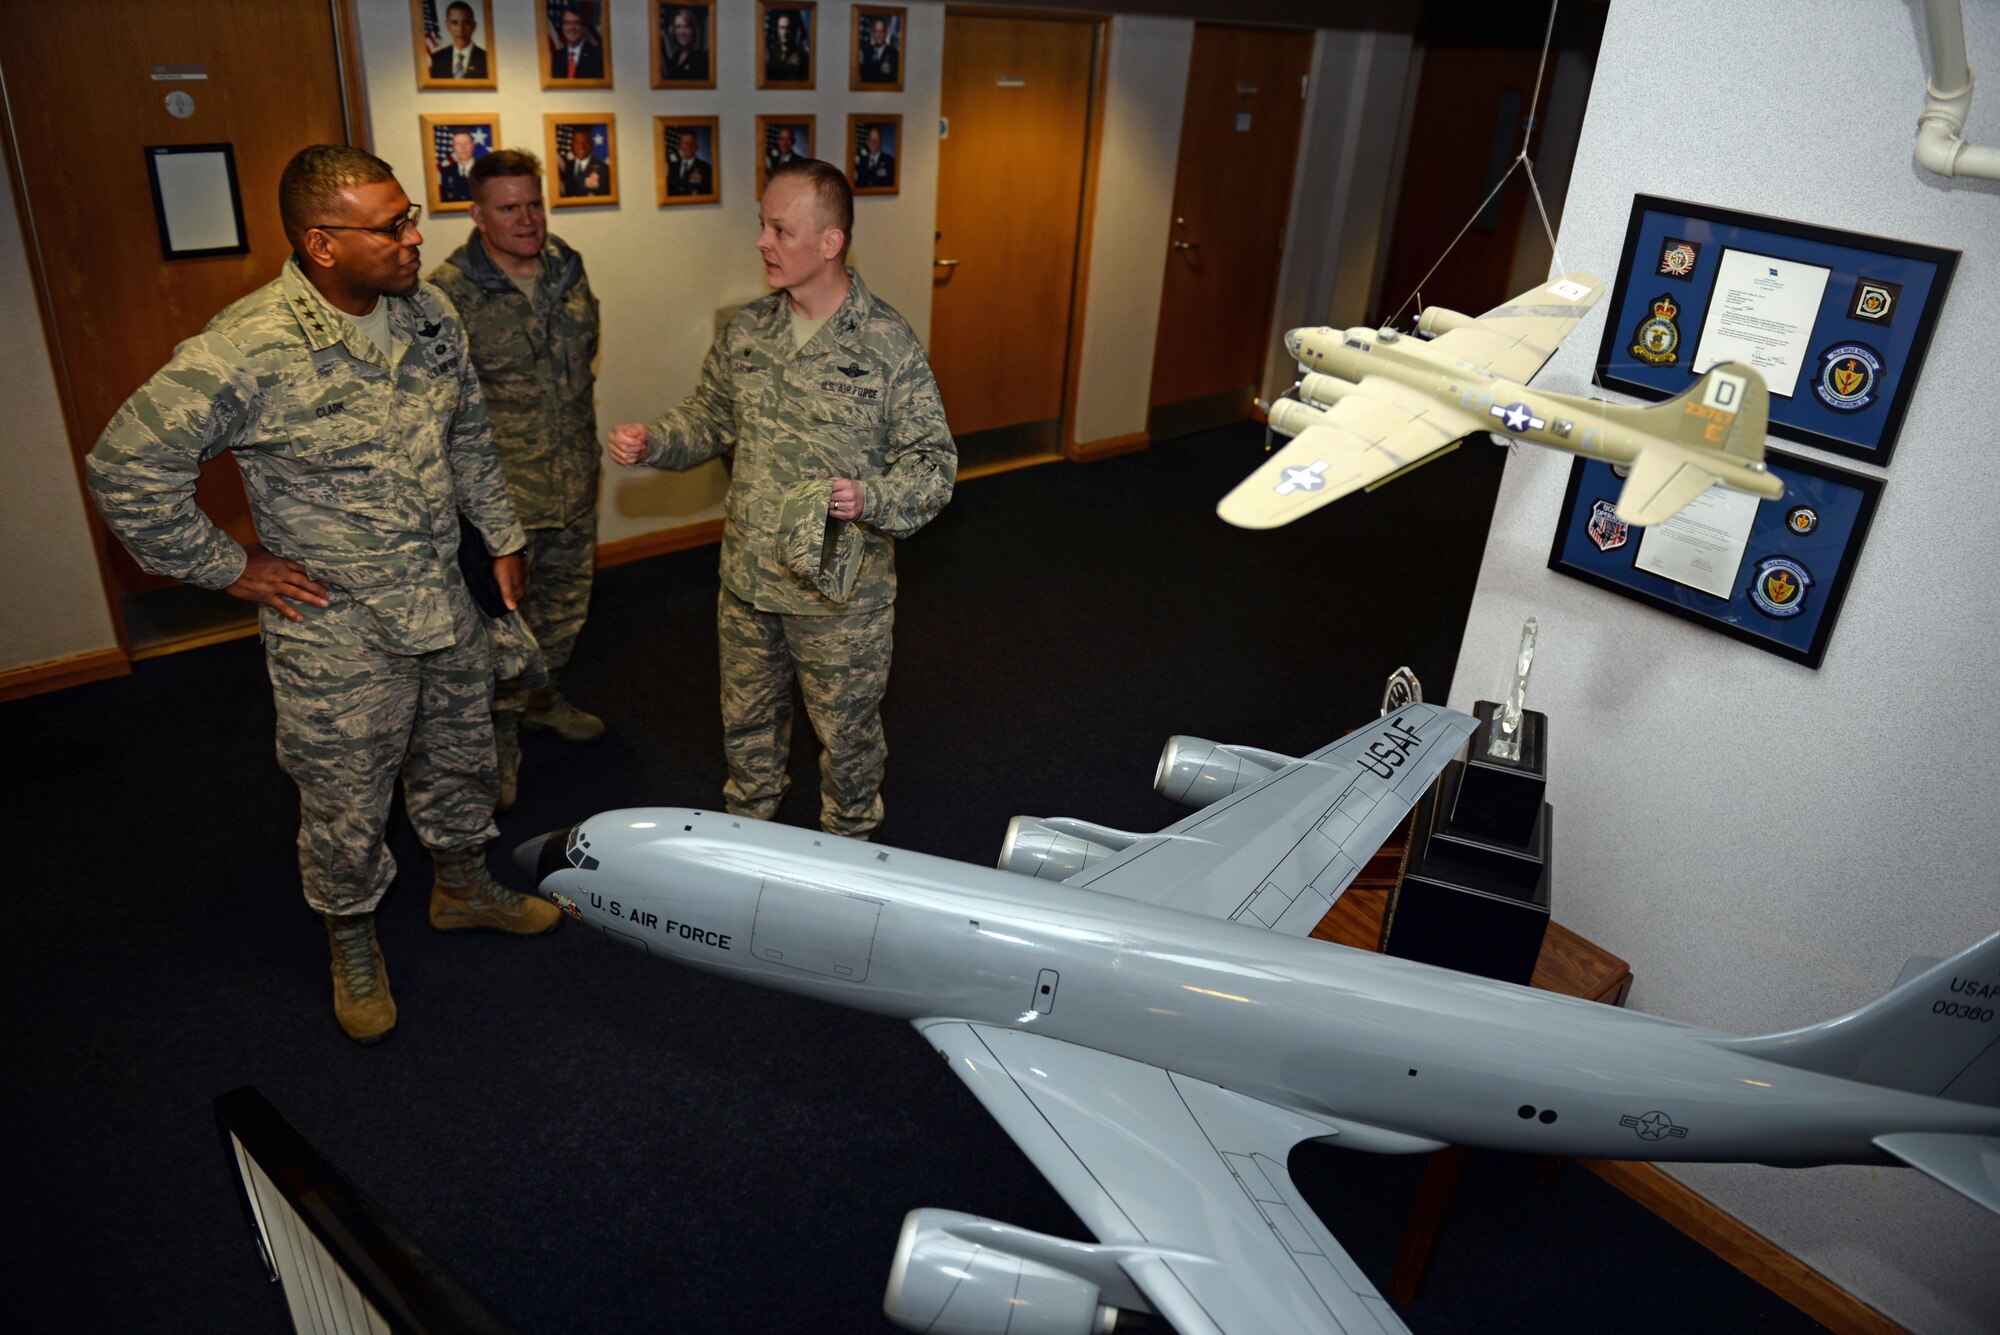 U.S. Air Force Col. Derek Salmi, right, 100th Operations Group commander, briefs U.S. Air Force Lt. Gen. Richard Clark, 3rd Air Force commander, on the flight operations during his visit Jan. 5, 2016, on RAF Mildenhall, England. Clark and Easton visited units around base to get a better understanding of Team Mildenhall contribution to the fight. (U.S. Air Force photo by Senior Airman Christine Halan) 